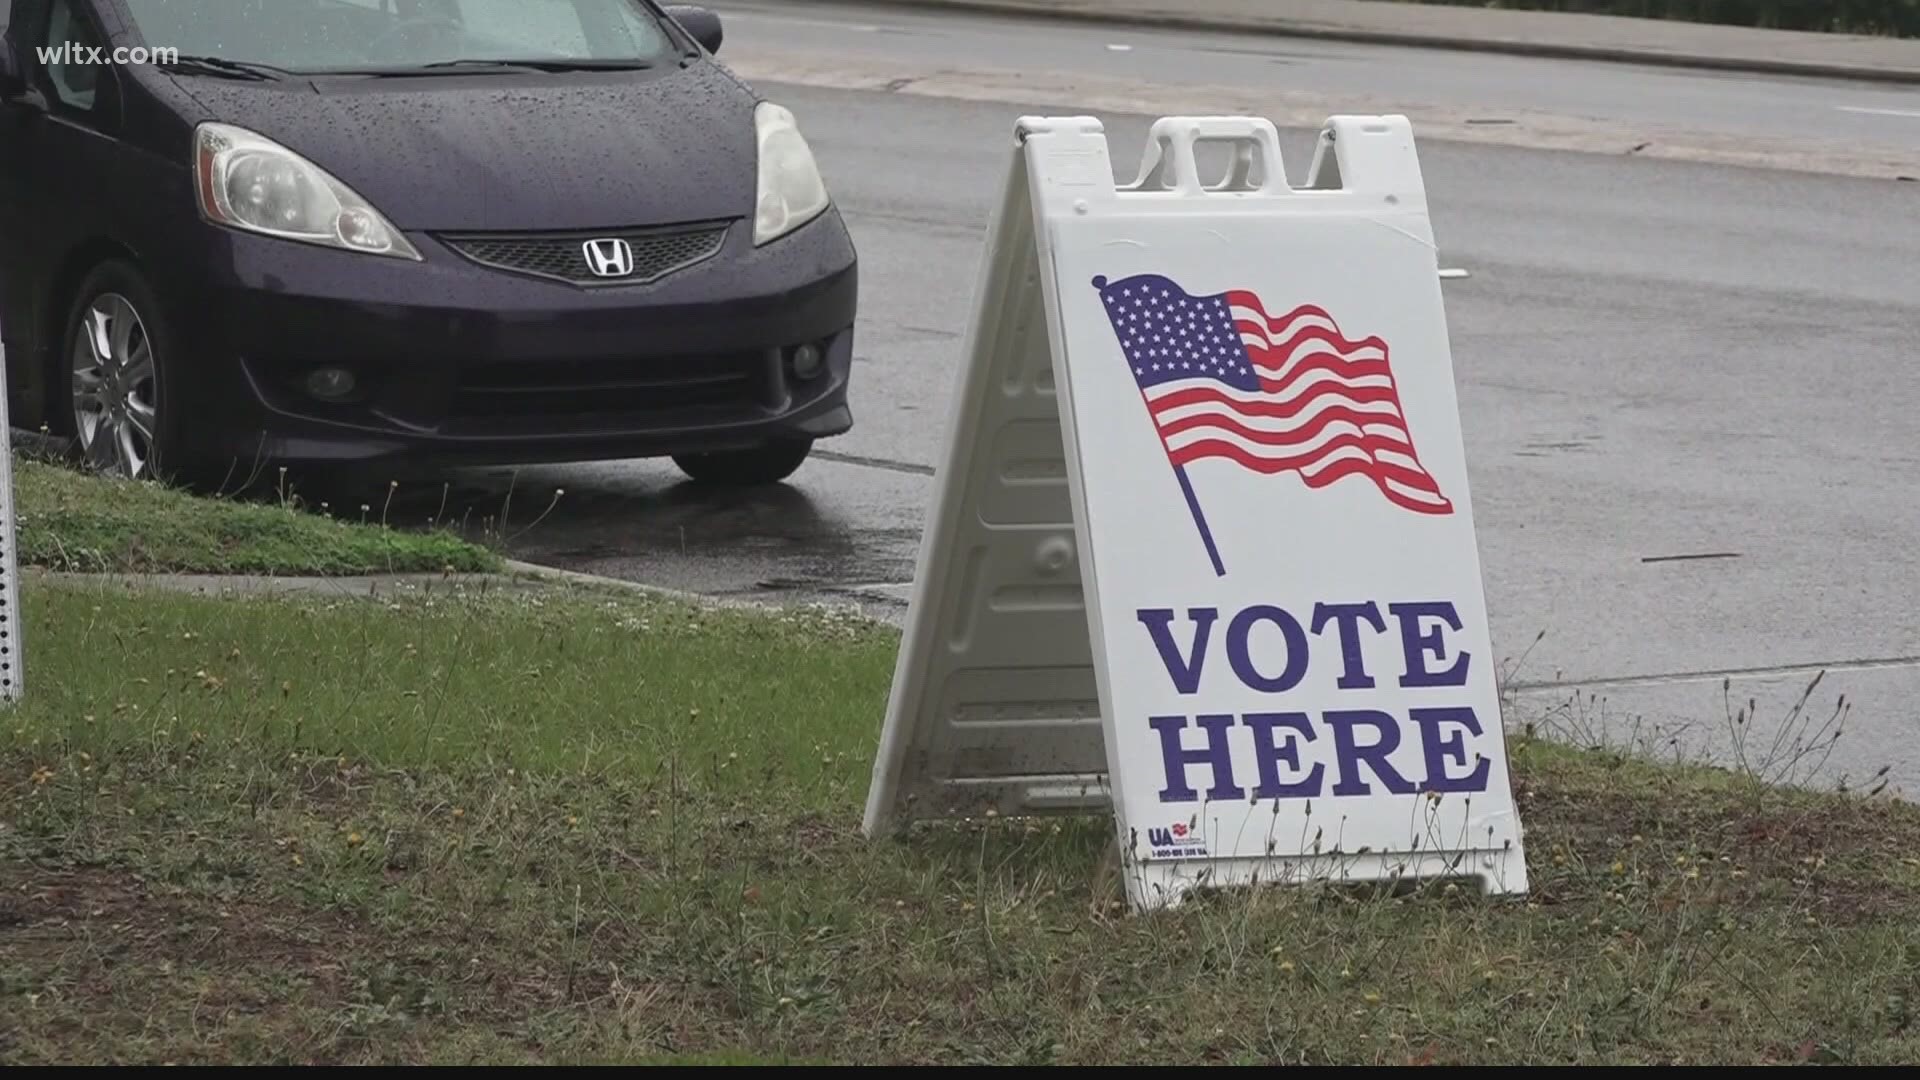 The two bills could change how elections operate in South Carolina.